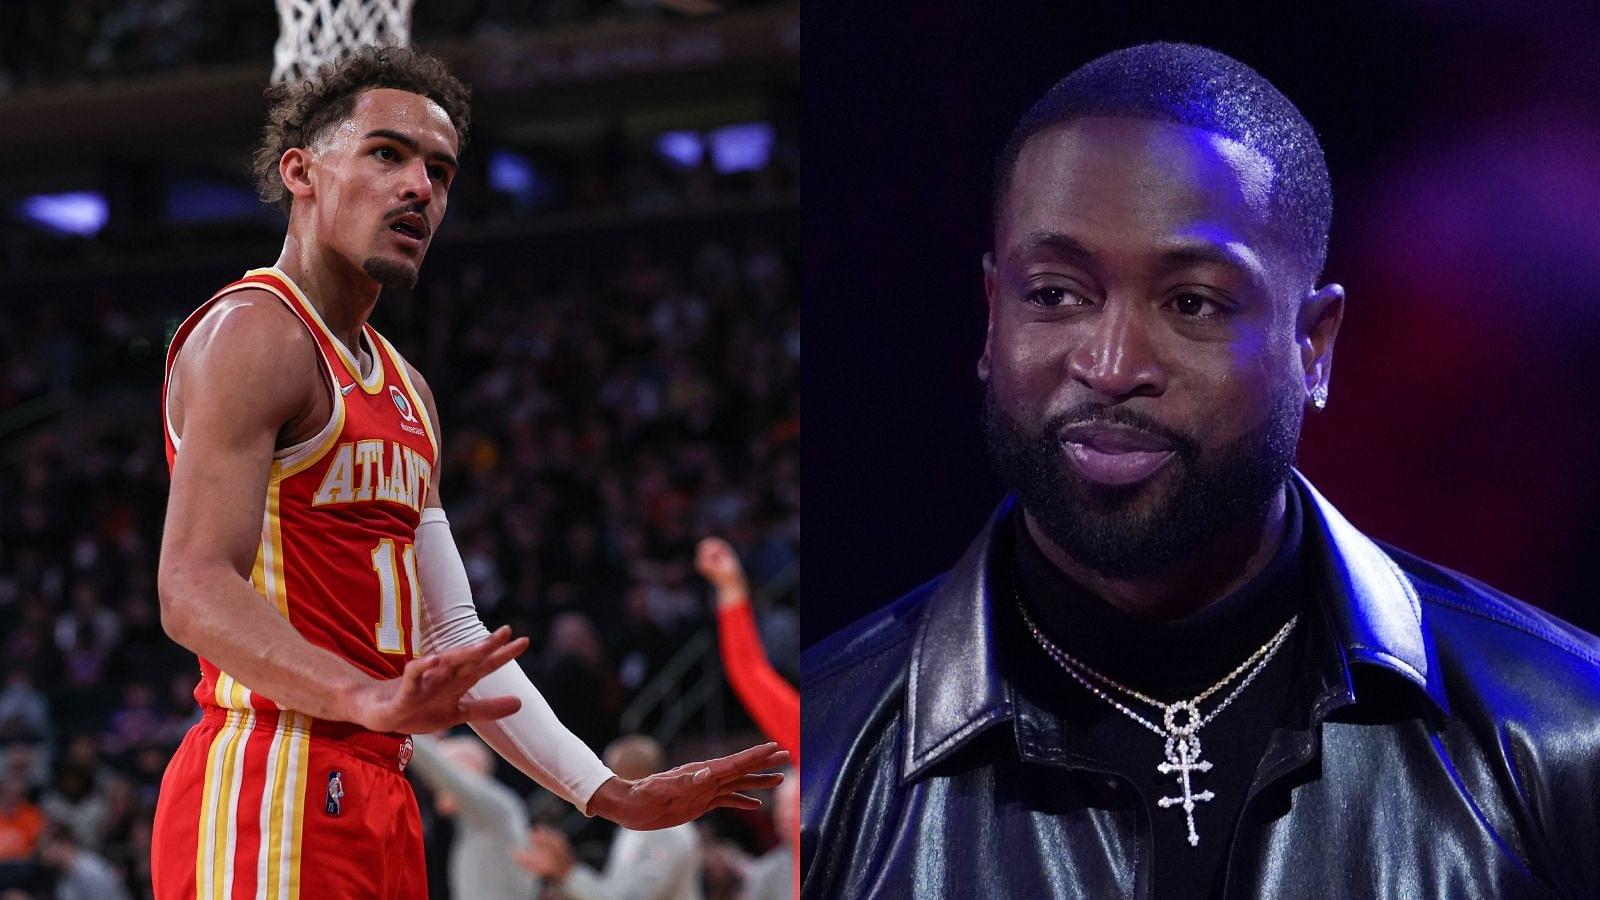 "Dwyane Wade predicted Trae Young would go off for 45 points at MSG": Miami Heat legend prophecy comes precisely true as Hawks superstar obliterates NYC